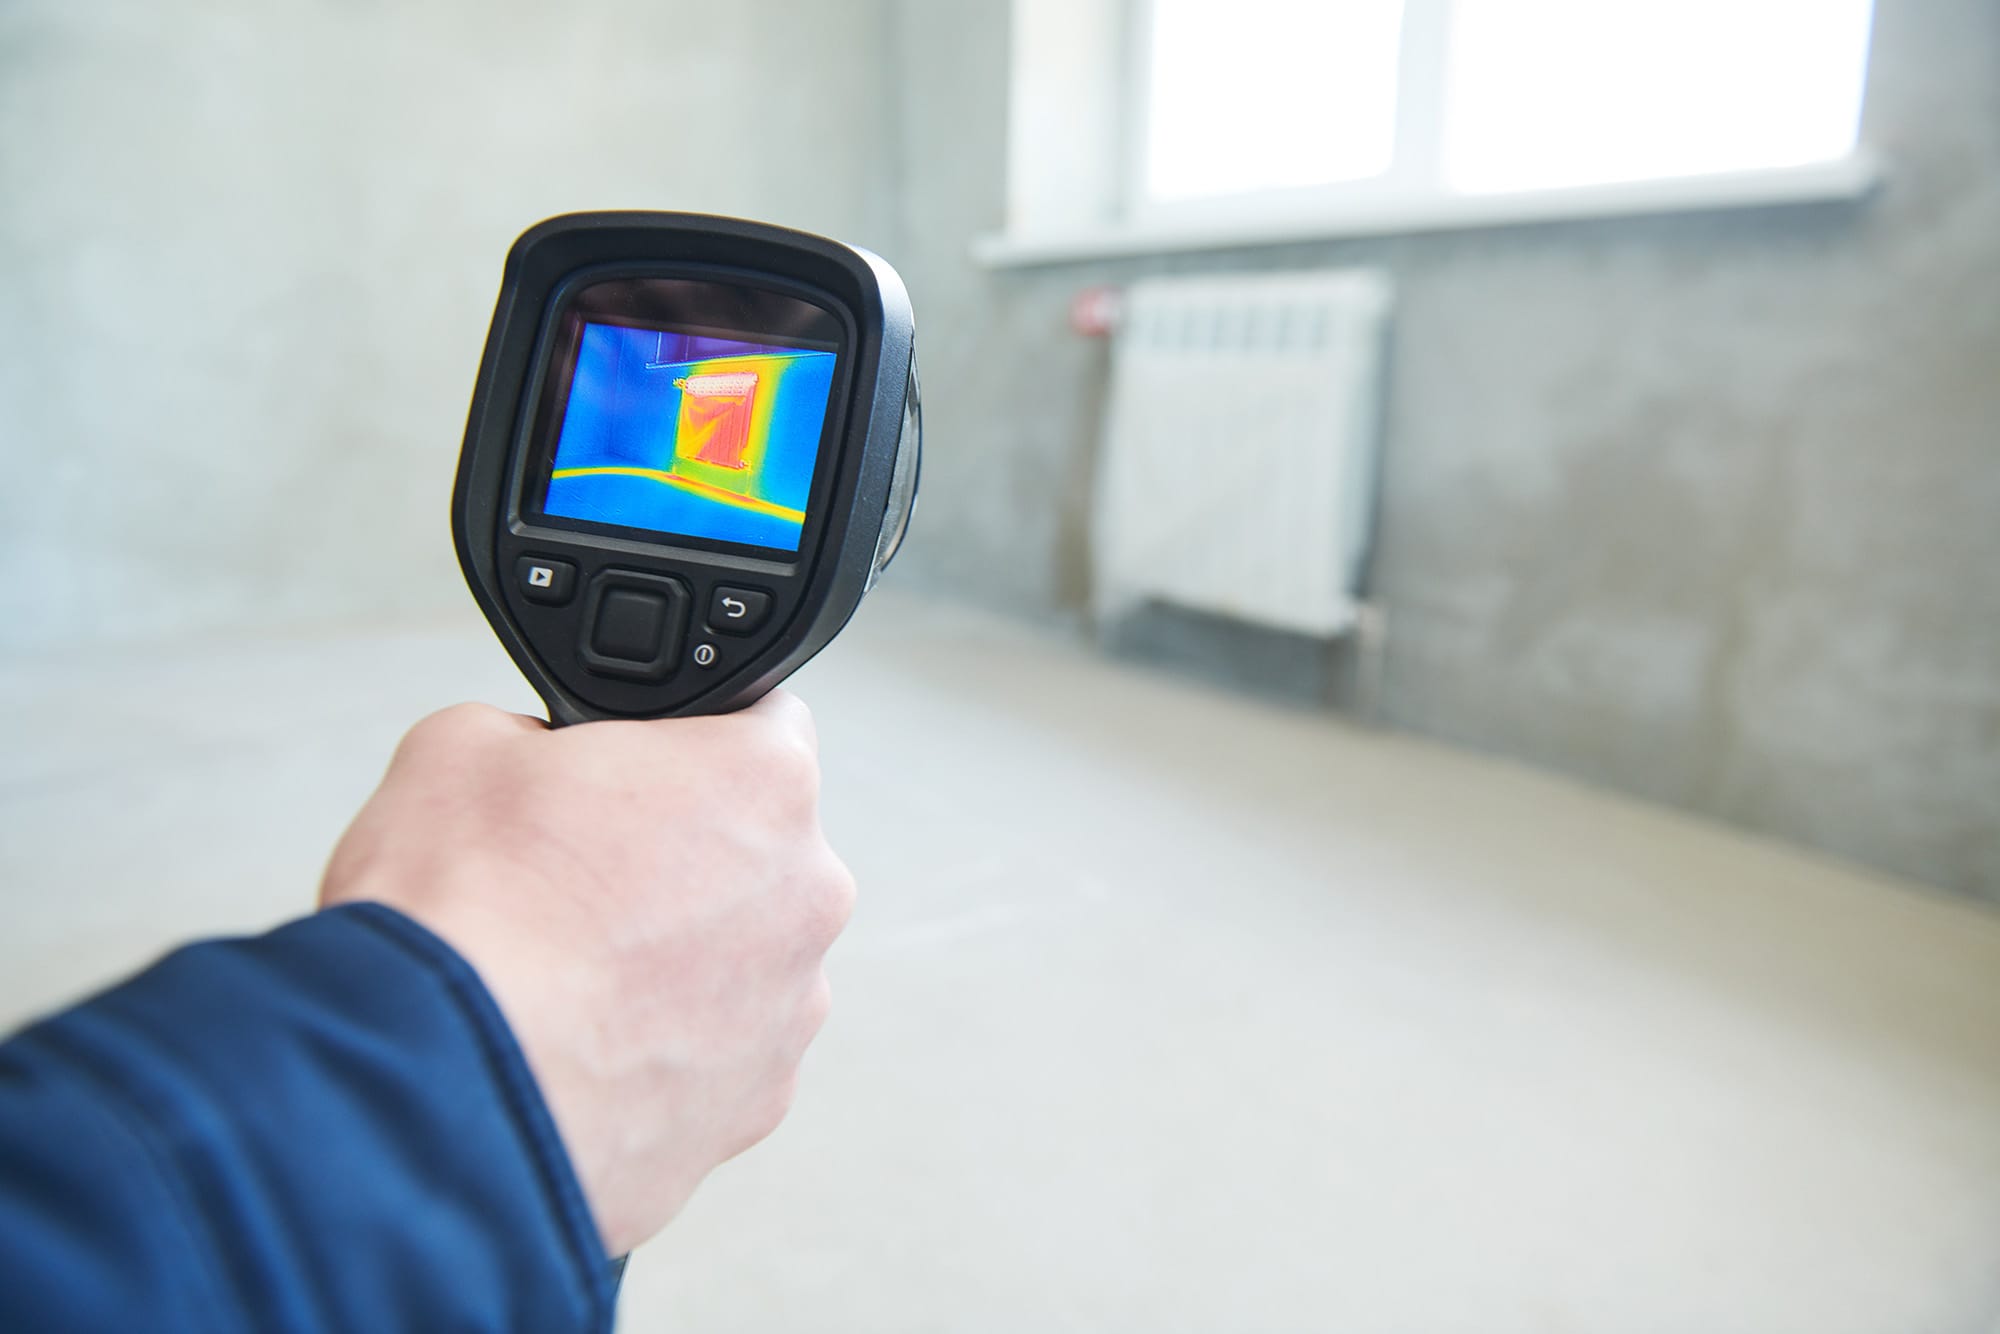 Thermal imaging camera inspection for temperature check and finding heating pipes